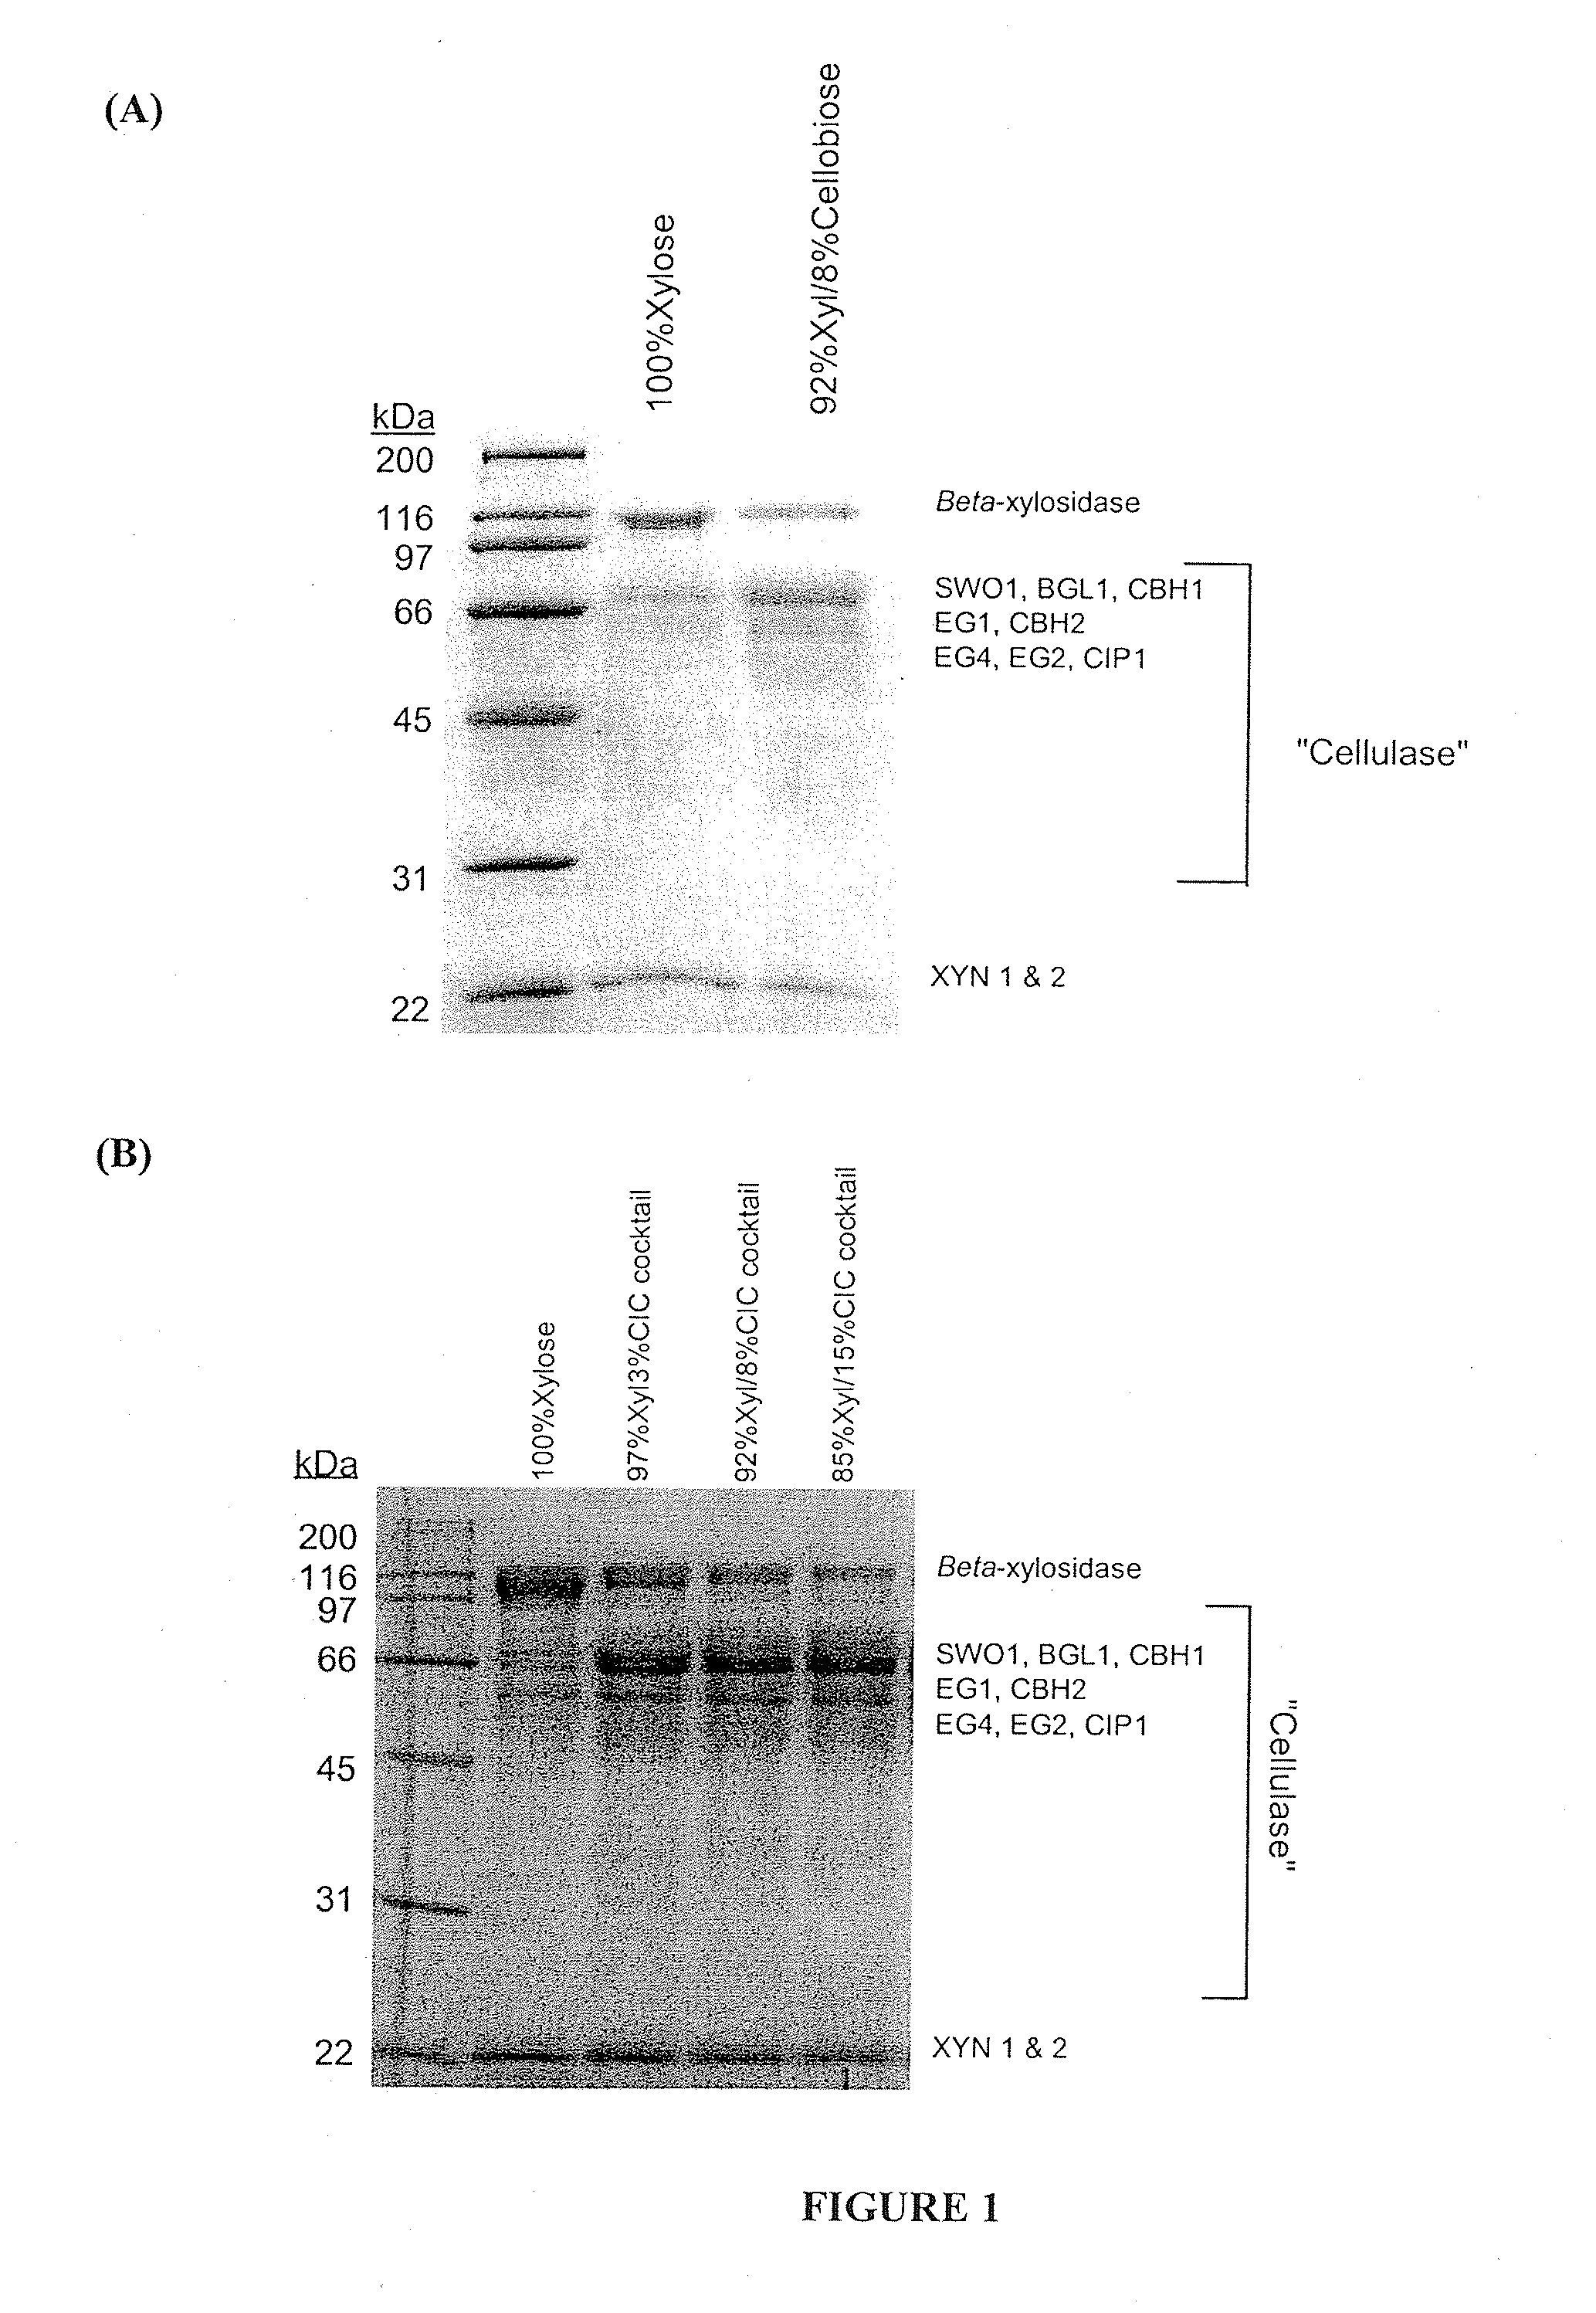 Method for cellulase production